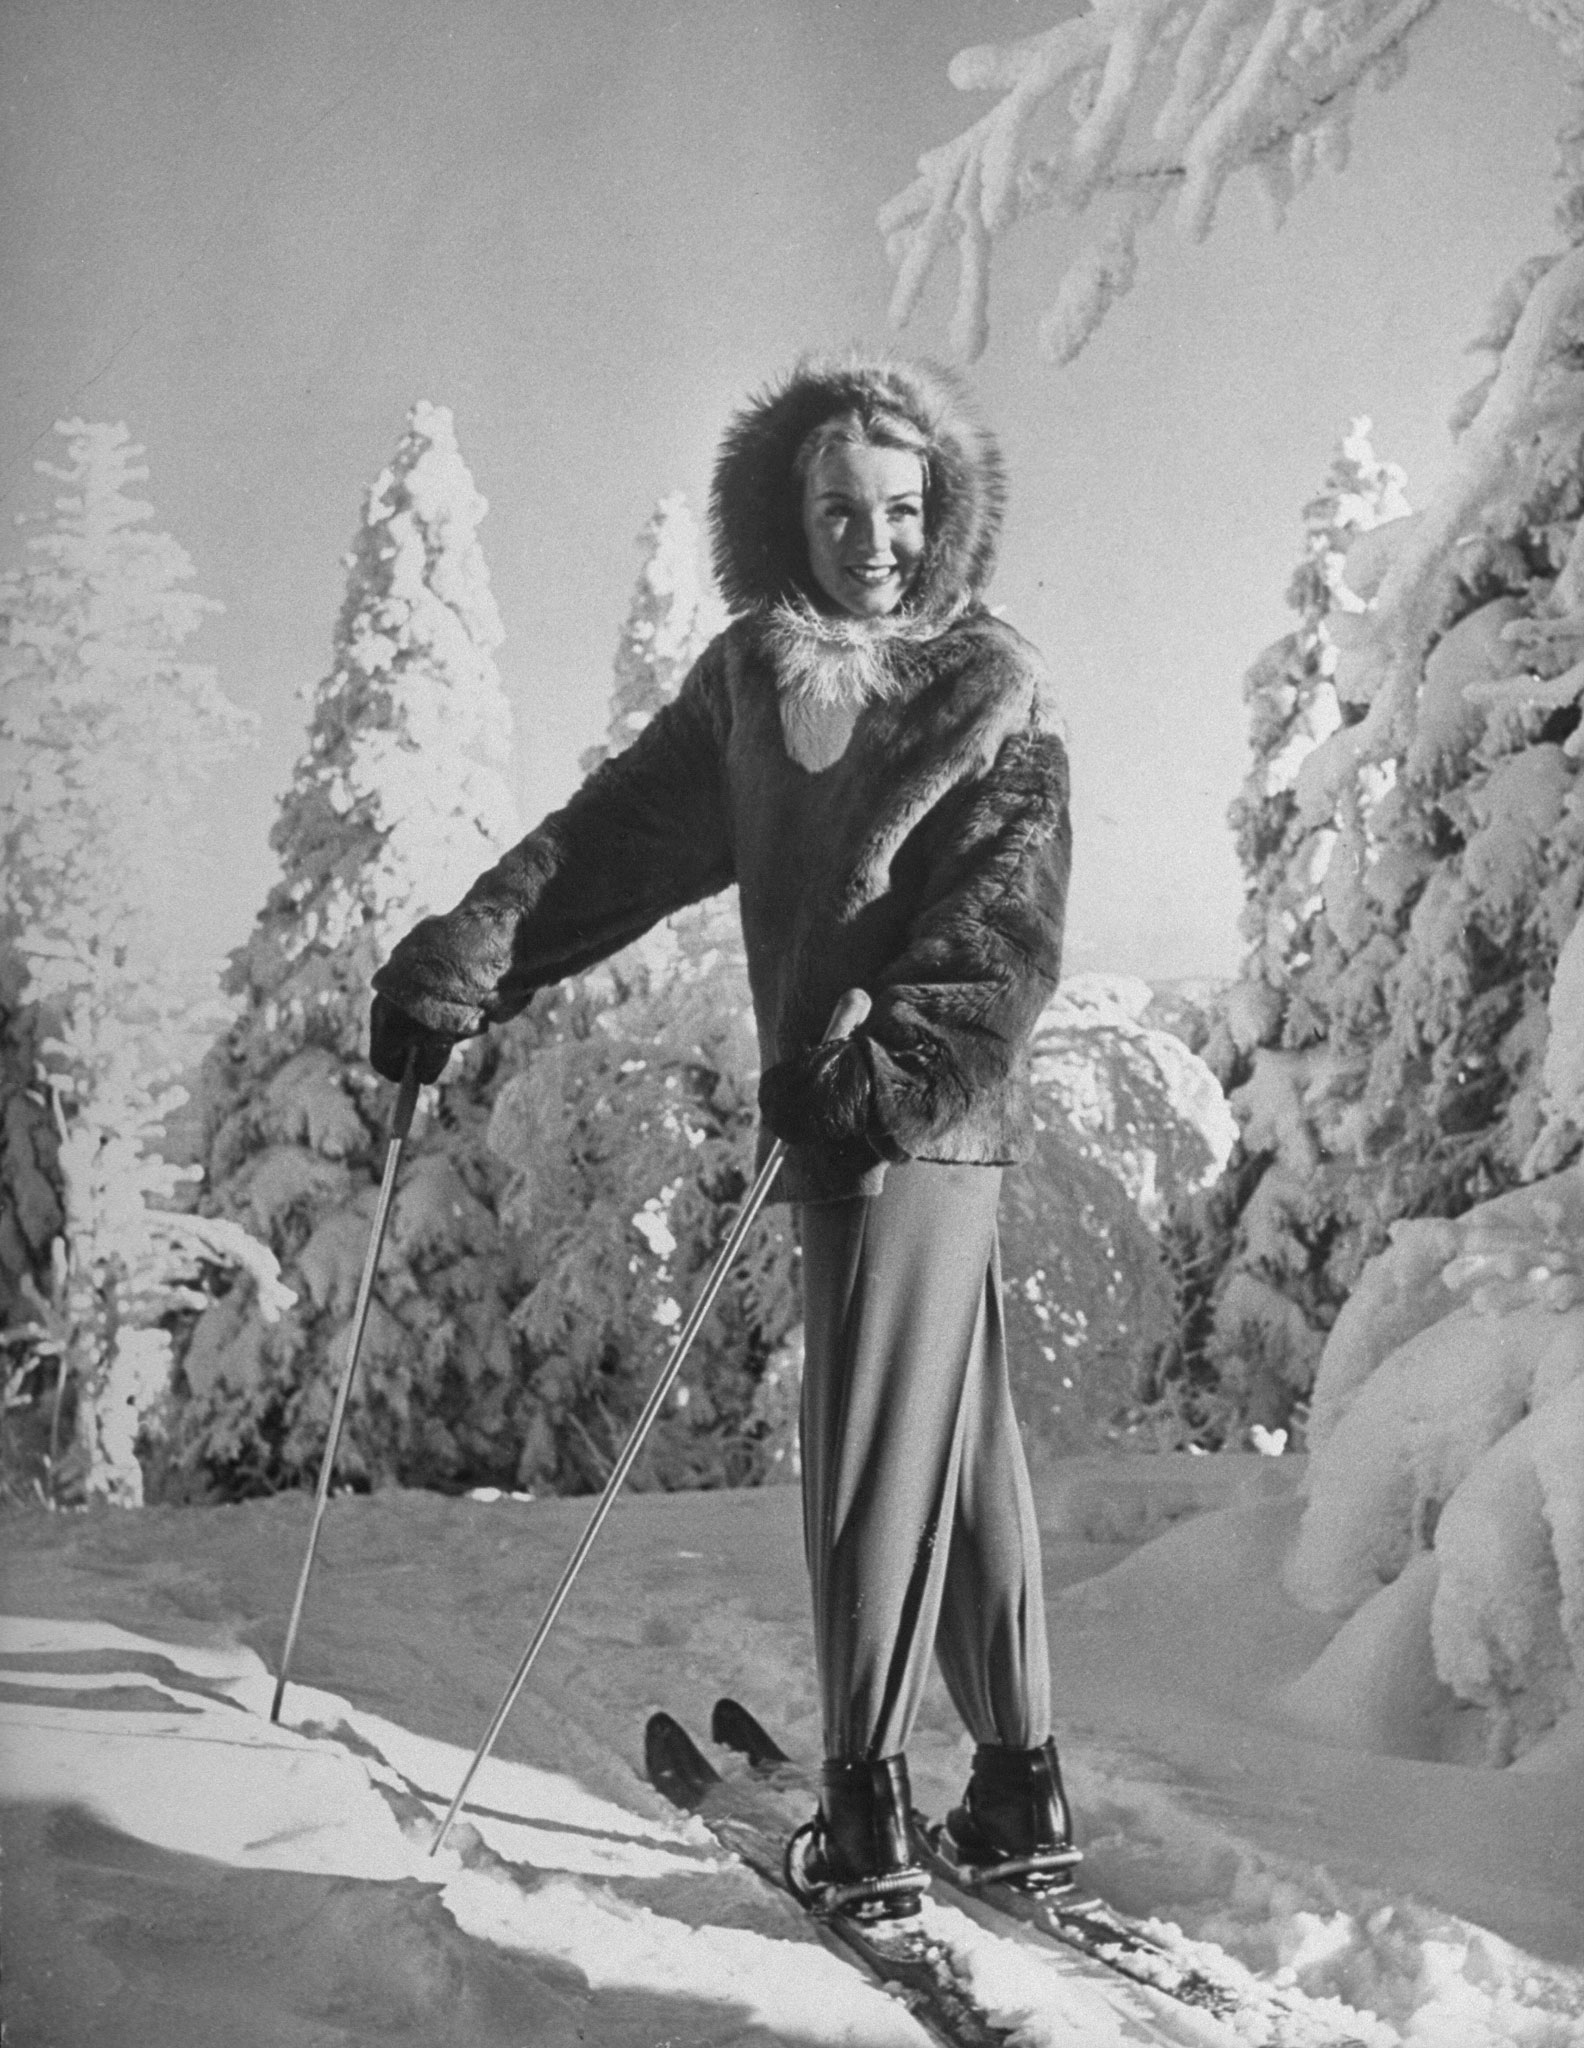 For skiing at 40 degrees below zero Blanche [Rybizka] wears a deerhide jacket, a raccoon-edged hood, fur-lined mittens and two pairs of underwear under her trim pants.